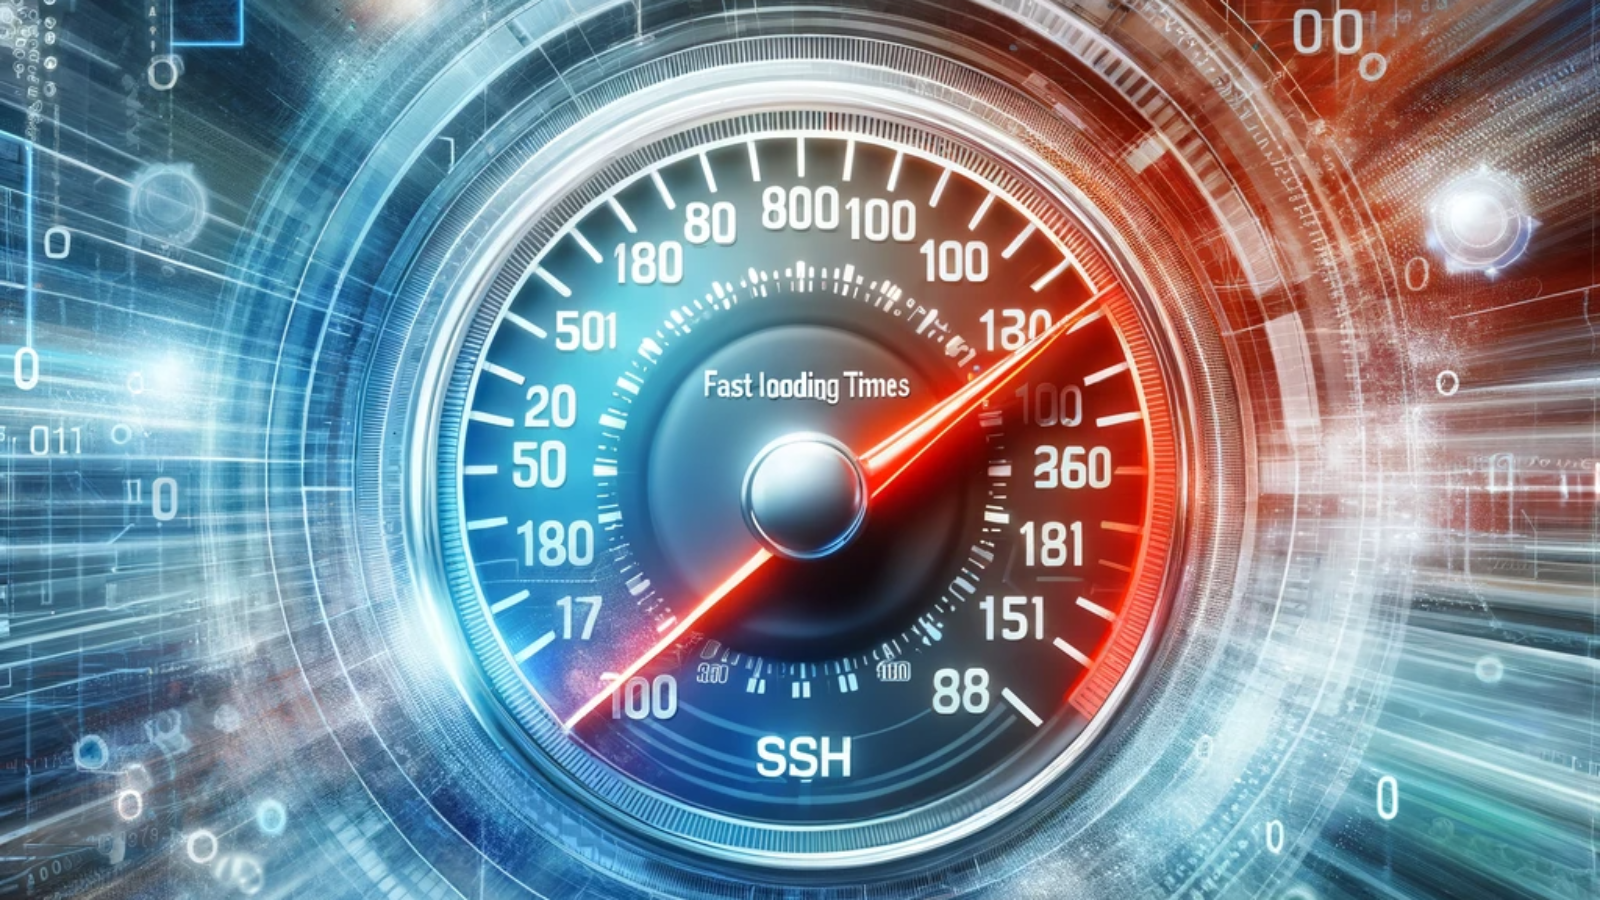 Fast website loading speed illustrated by a speedometer and digital background.